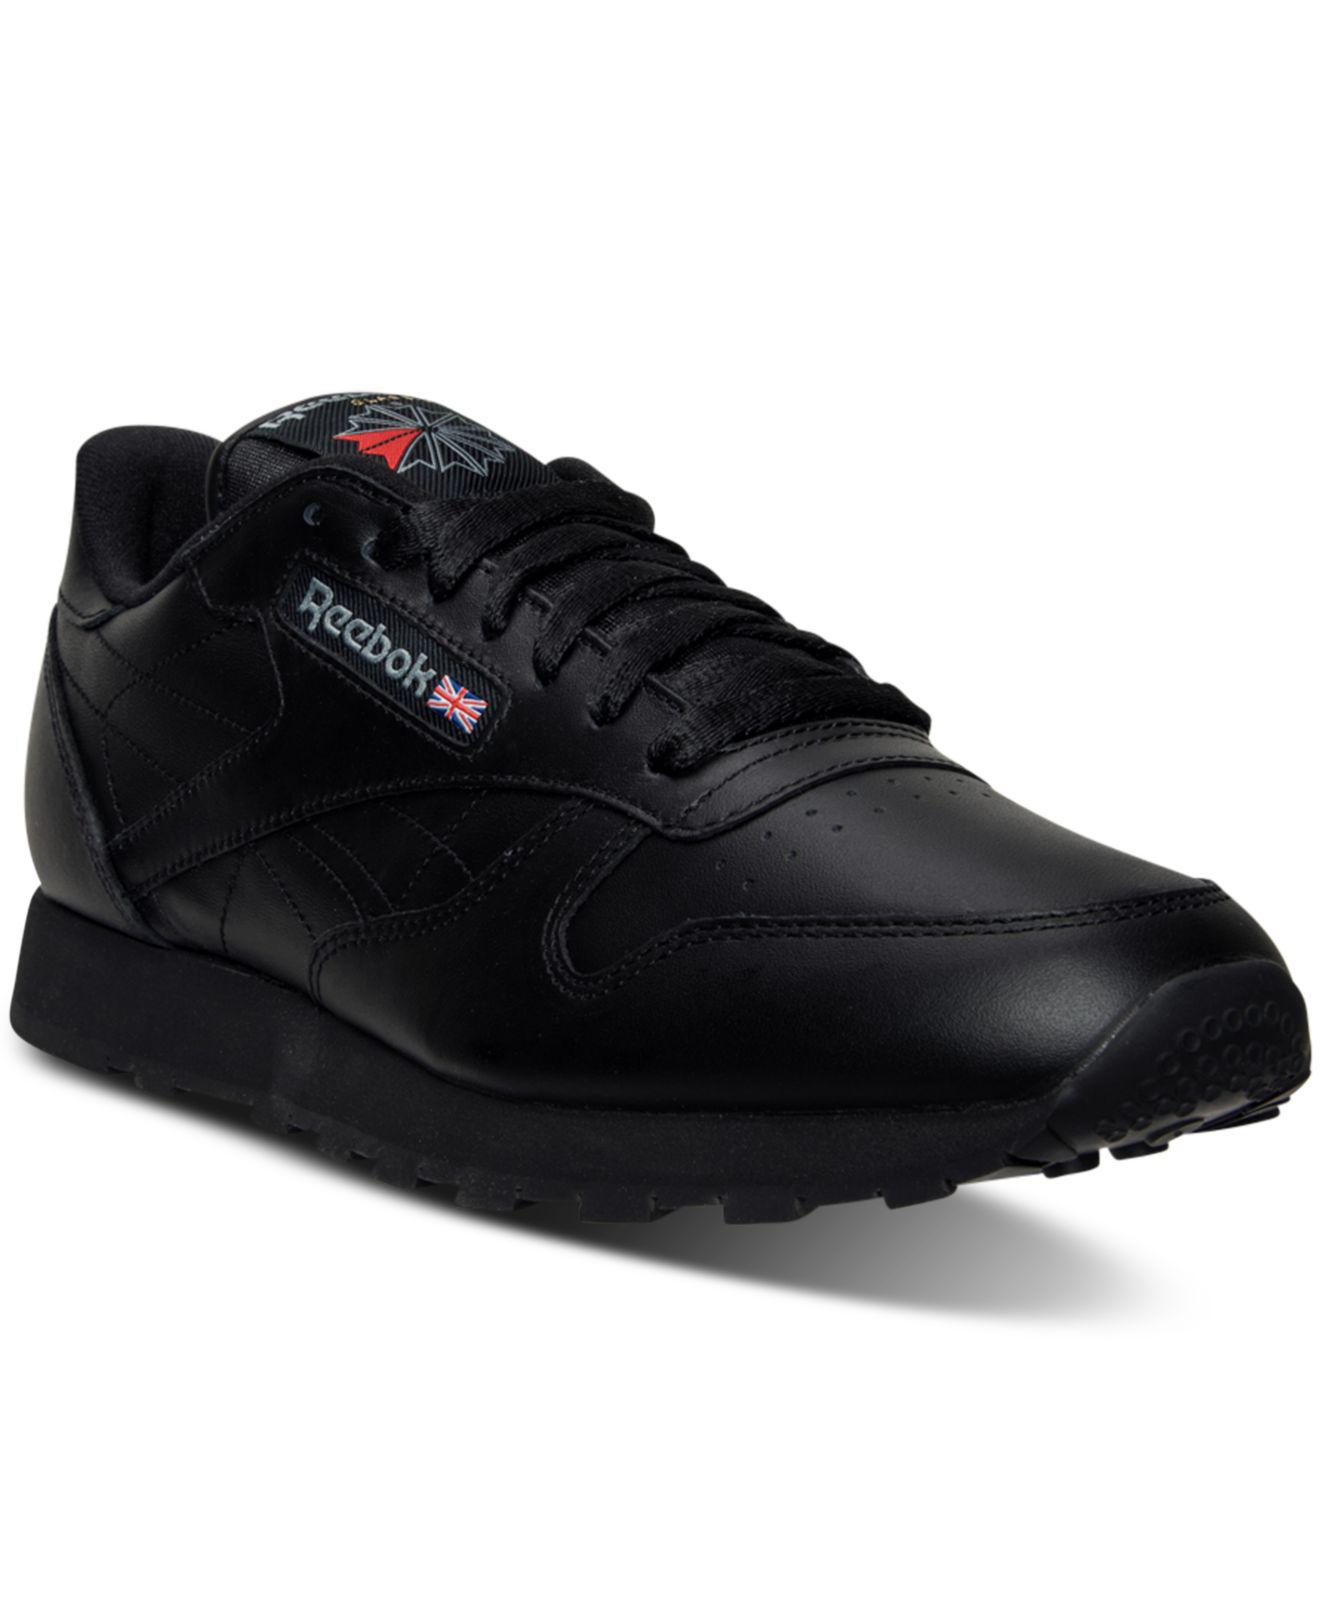 Lyst - Reebok Classic Leather Sneakers in Black for Men